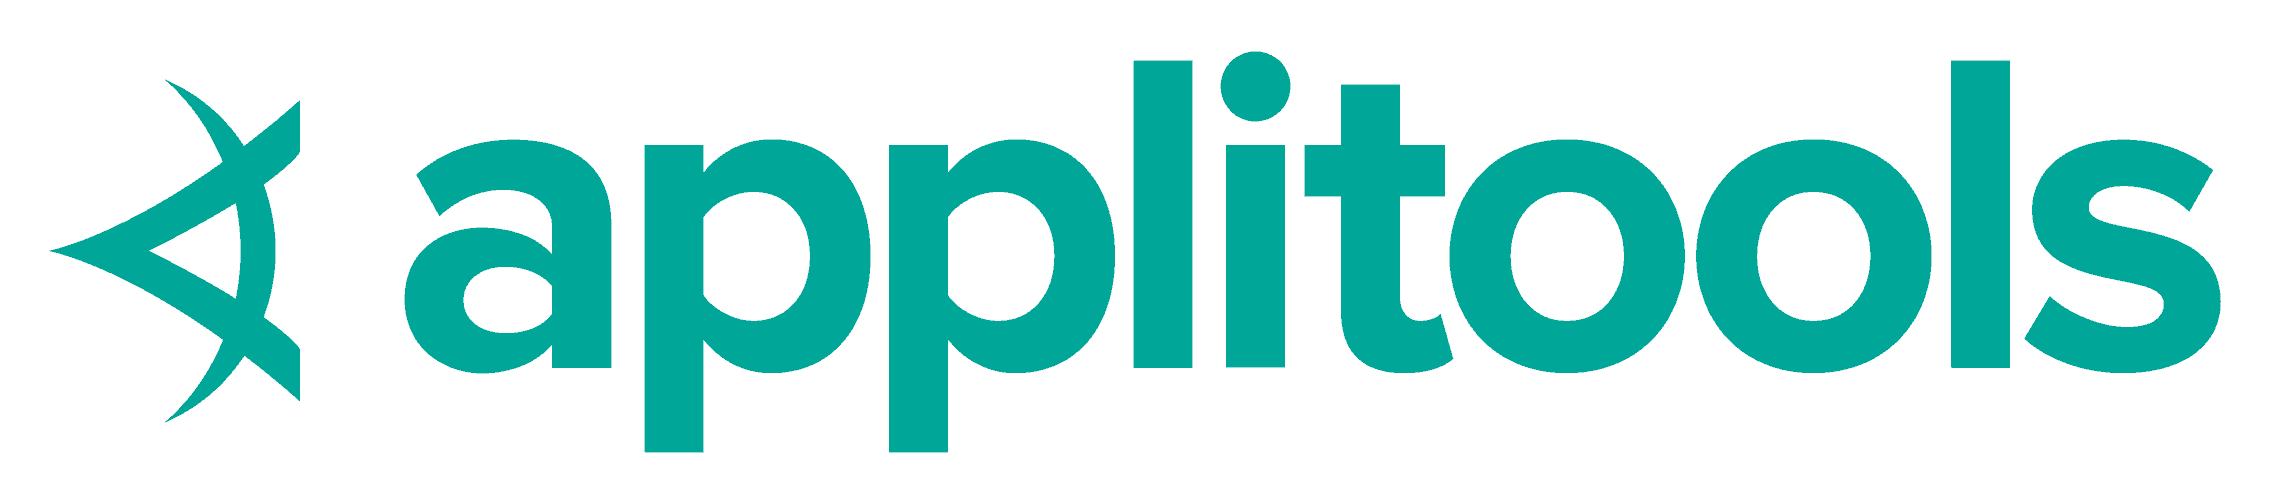 Applitools company logo in teal color.